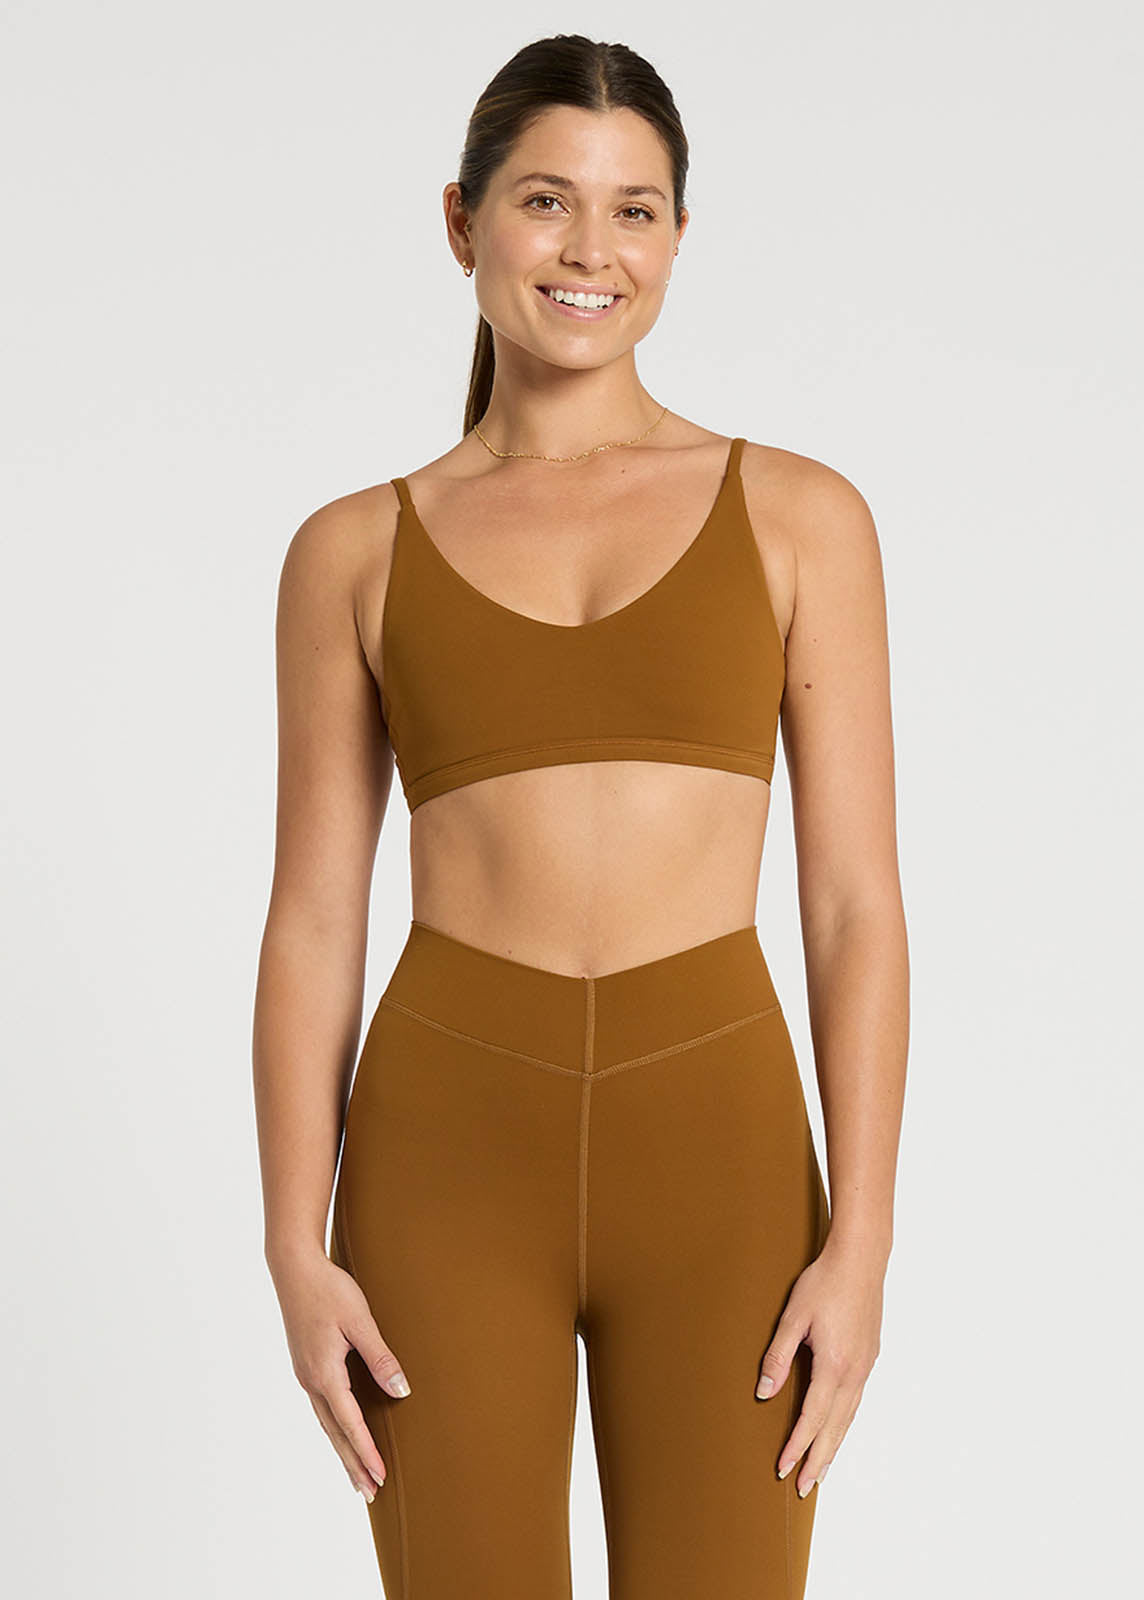 Neutral-Tone Ribbed Athleisure / Yoga Sets - by Heralane Leisure